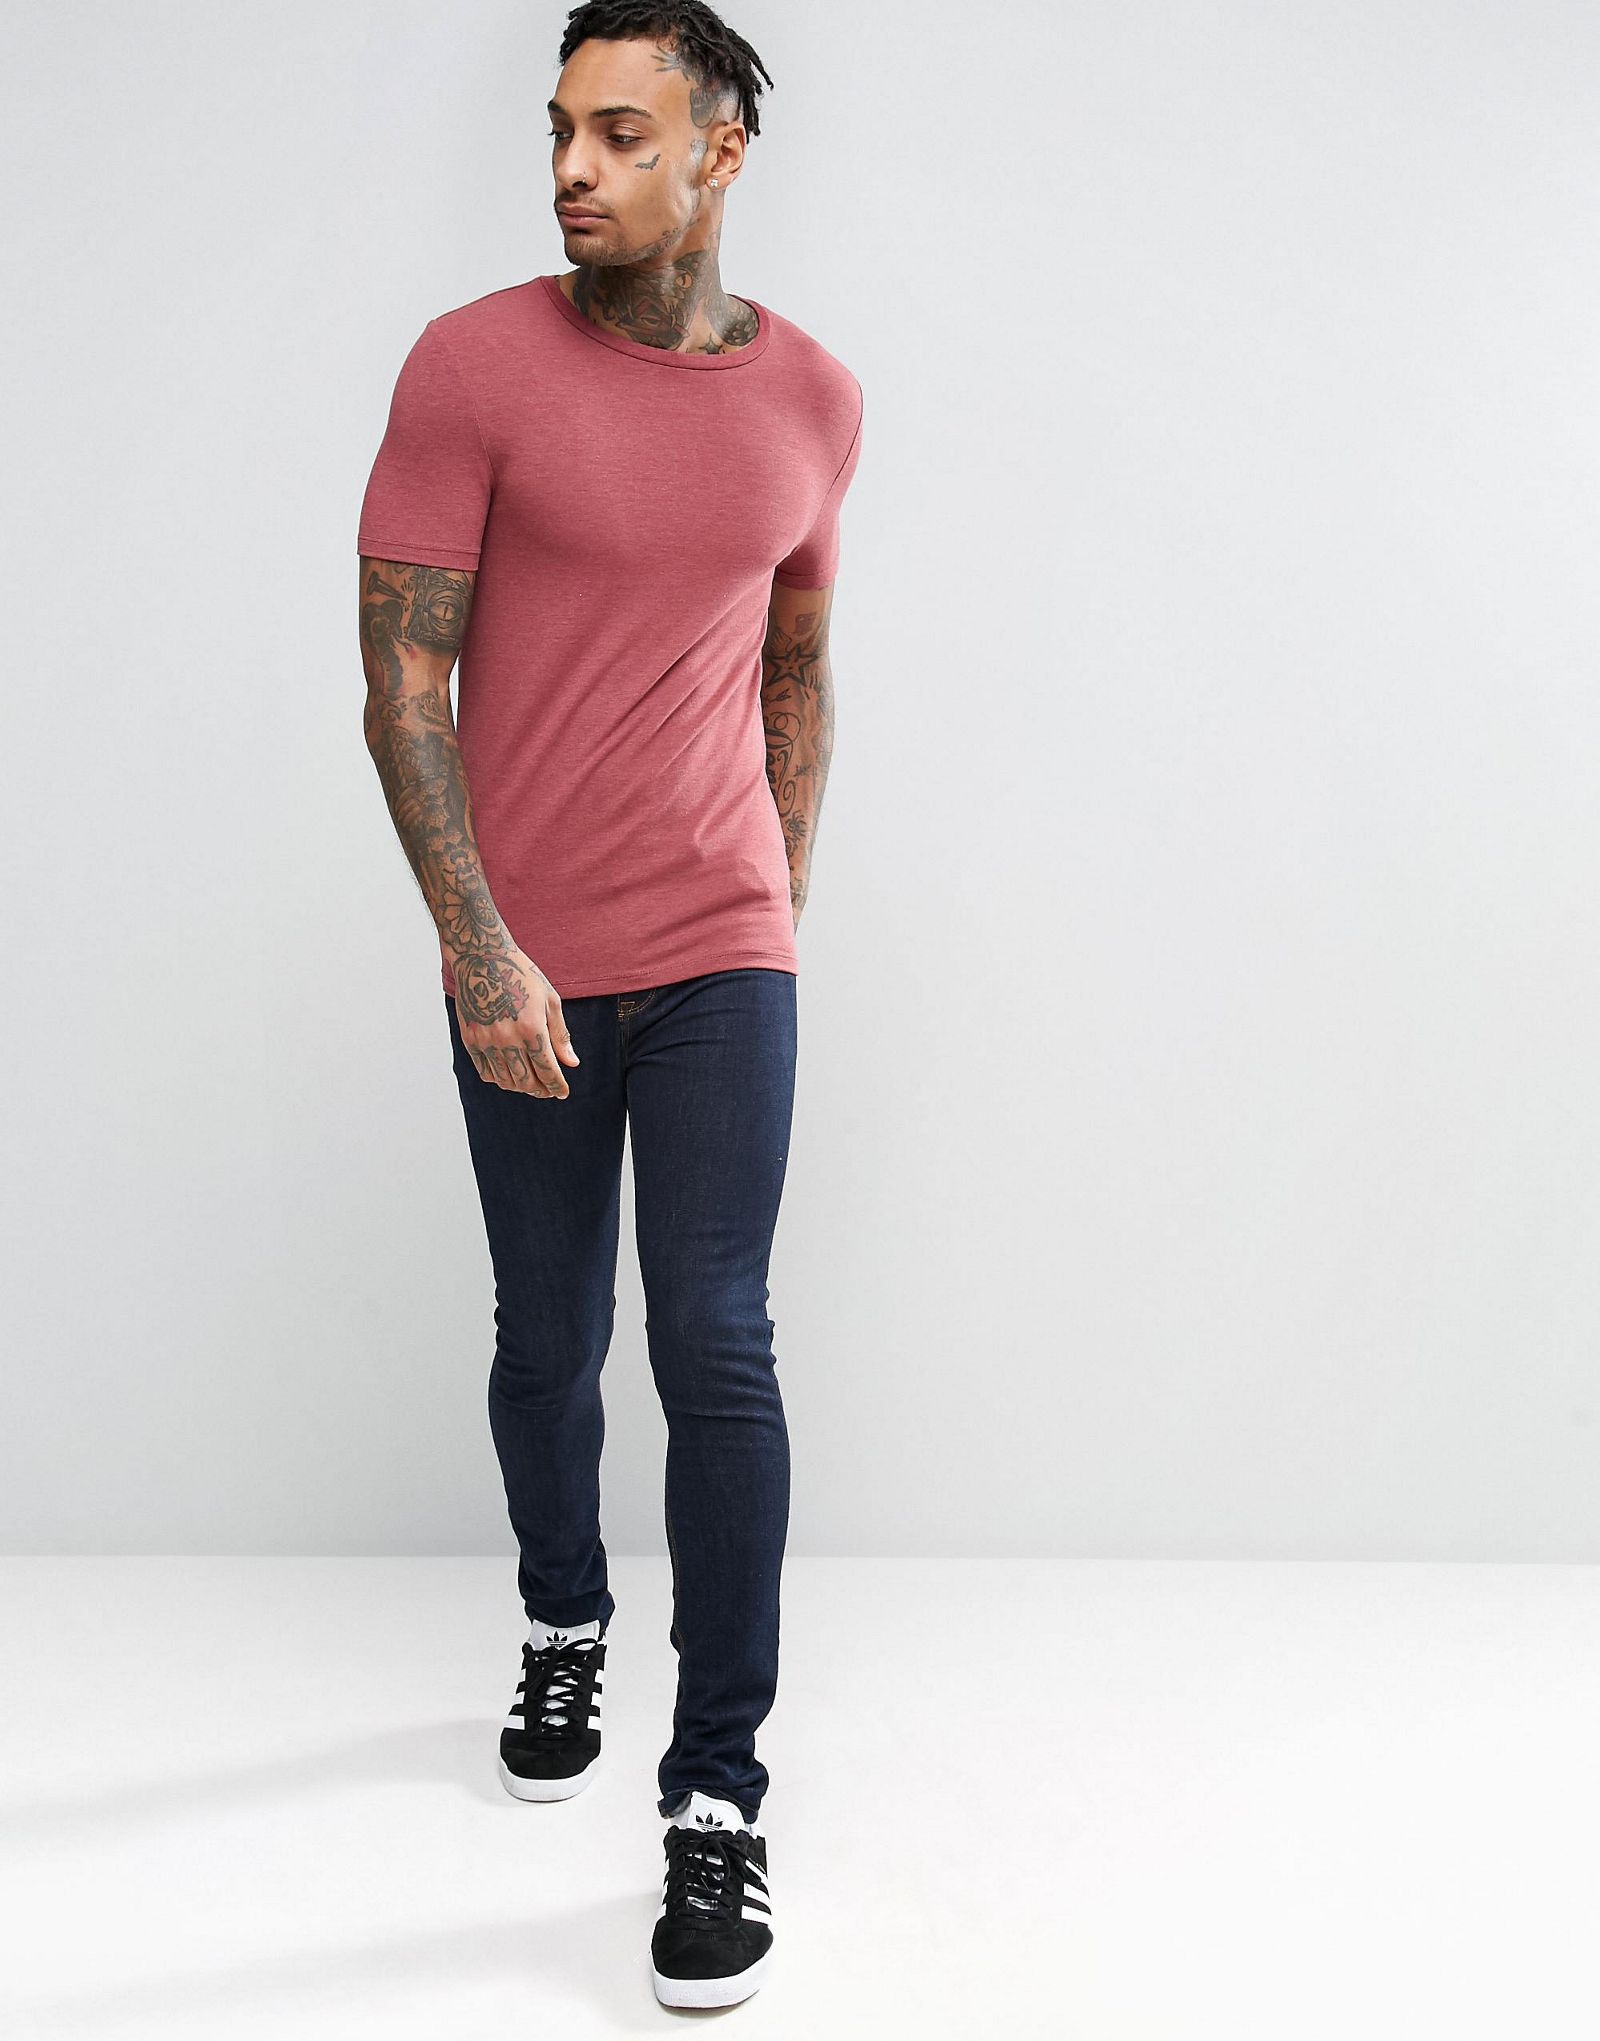 ASOS Extreme Muscle T-Shirt In Red Marl